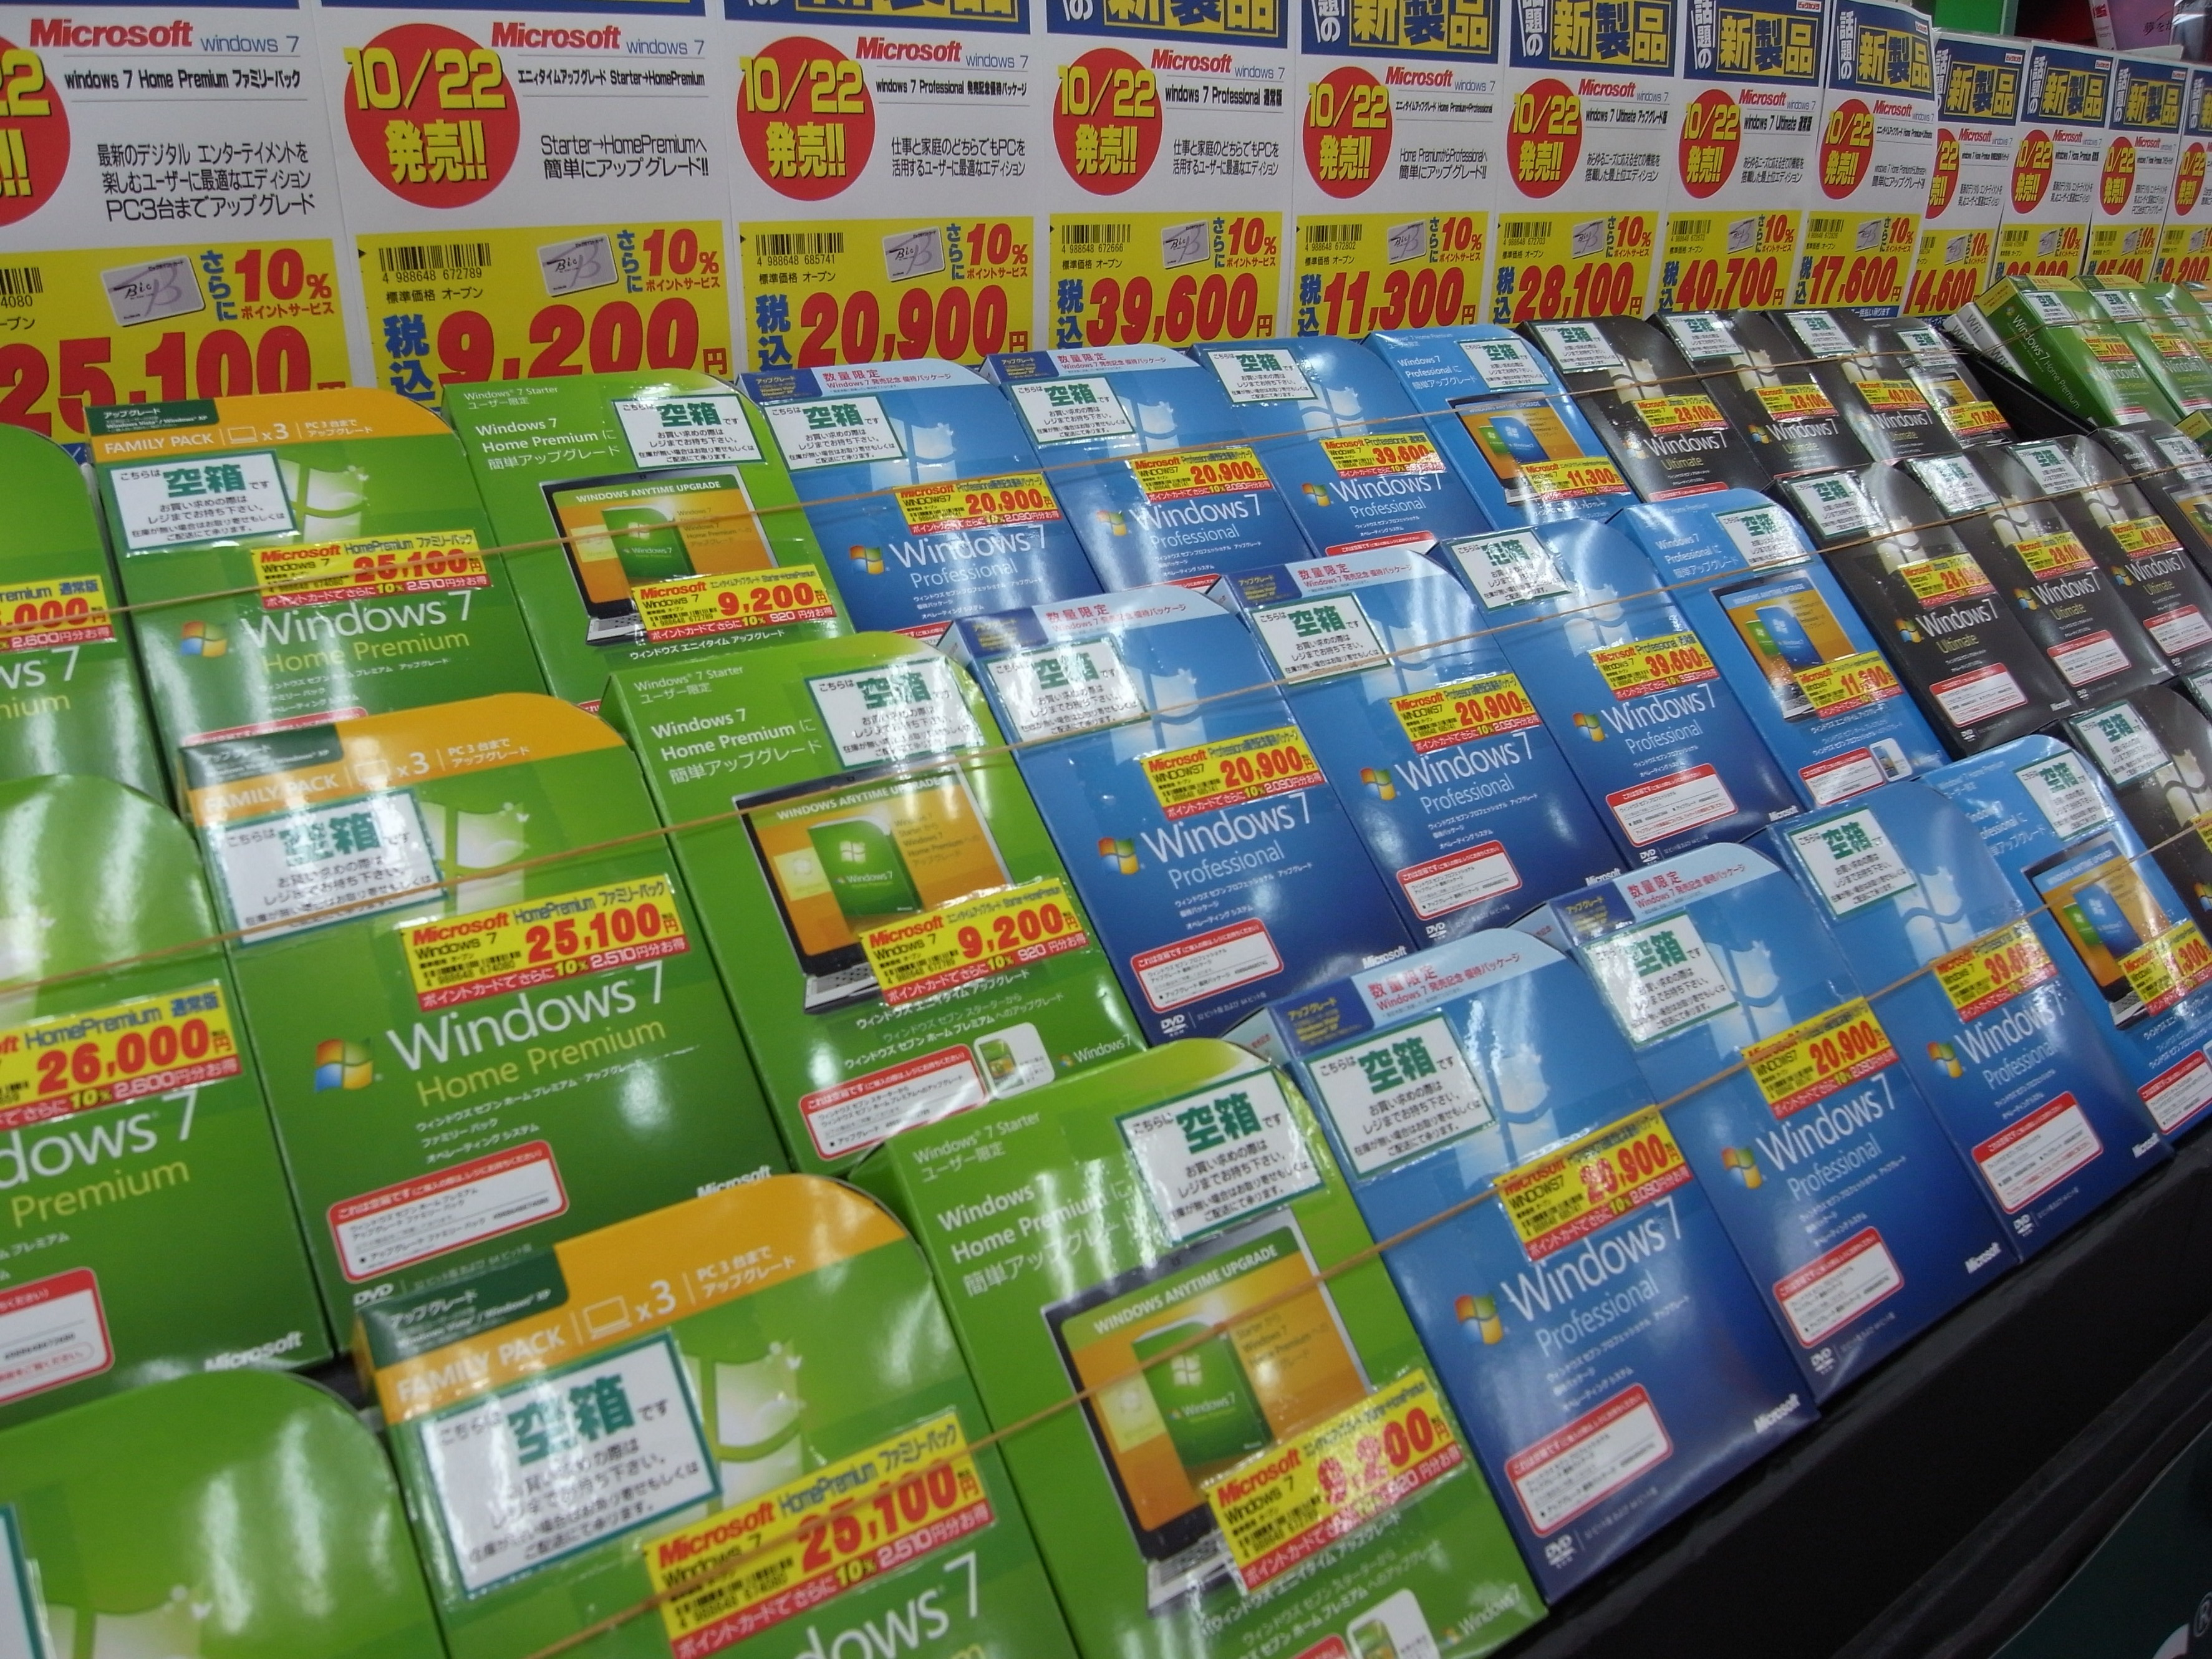 Photo of Windows 7 boxes on sale in Japan